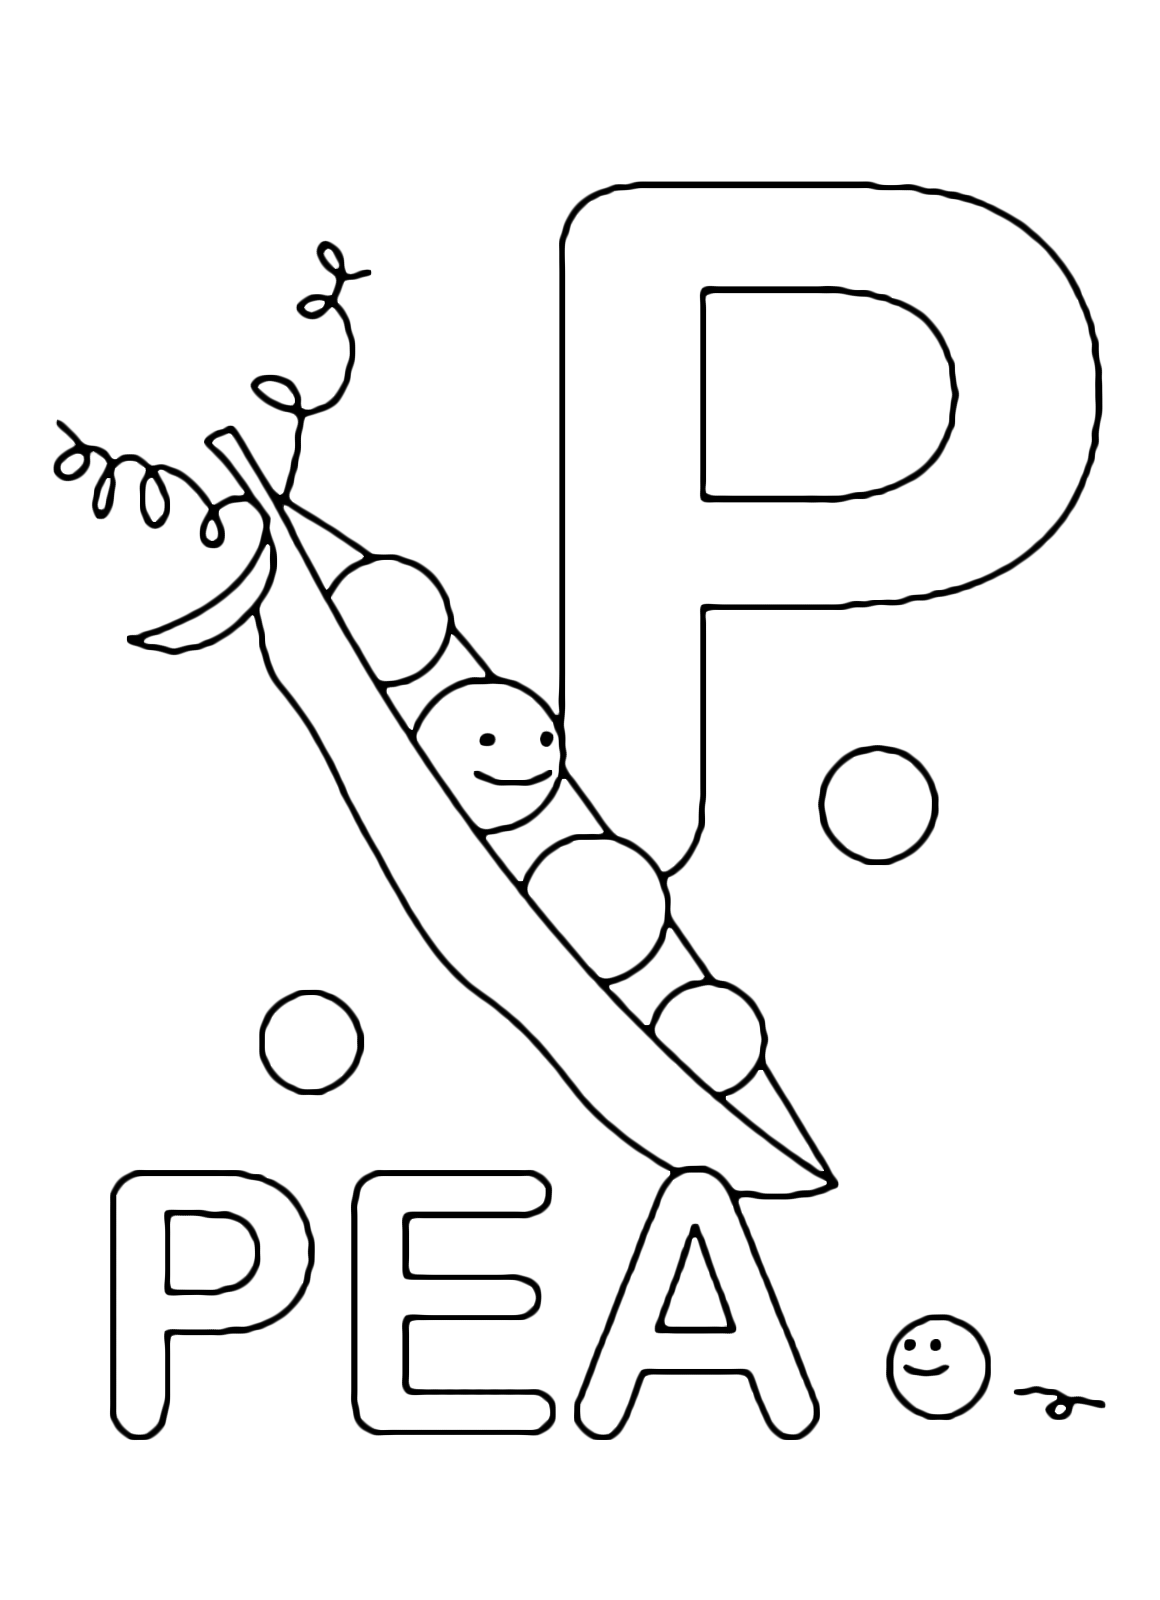 Letters and numbers - P for pea uppercase letter